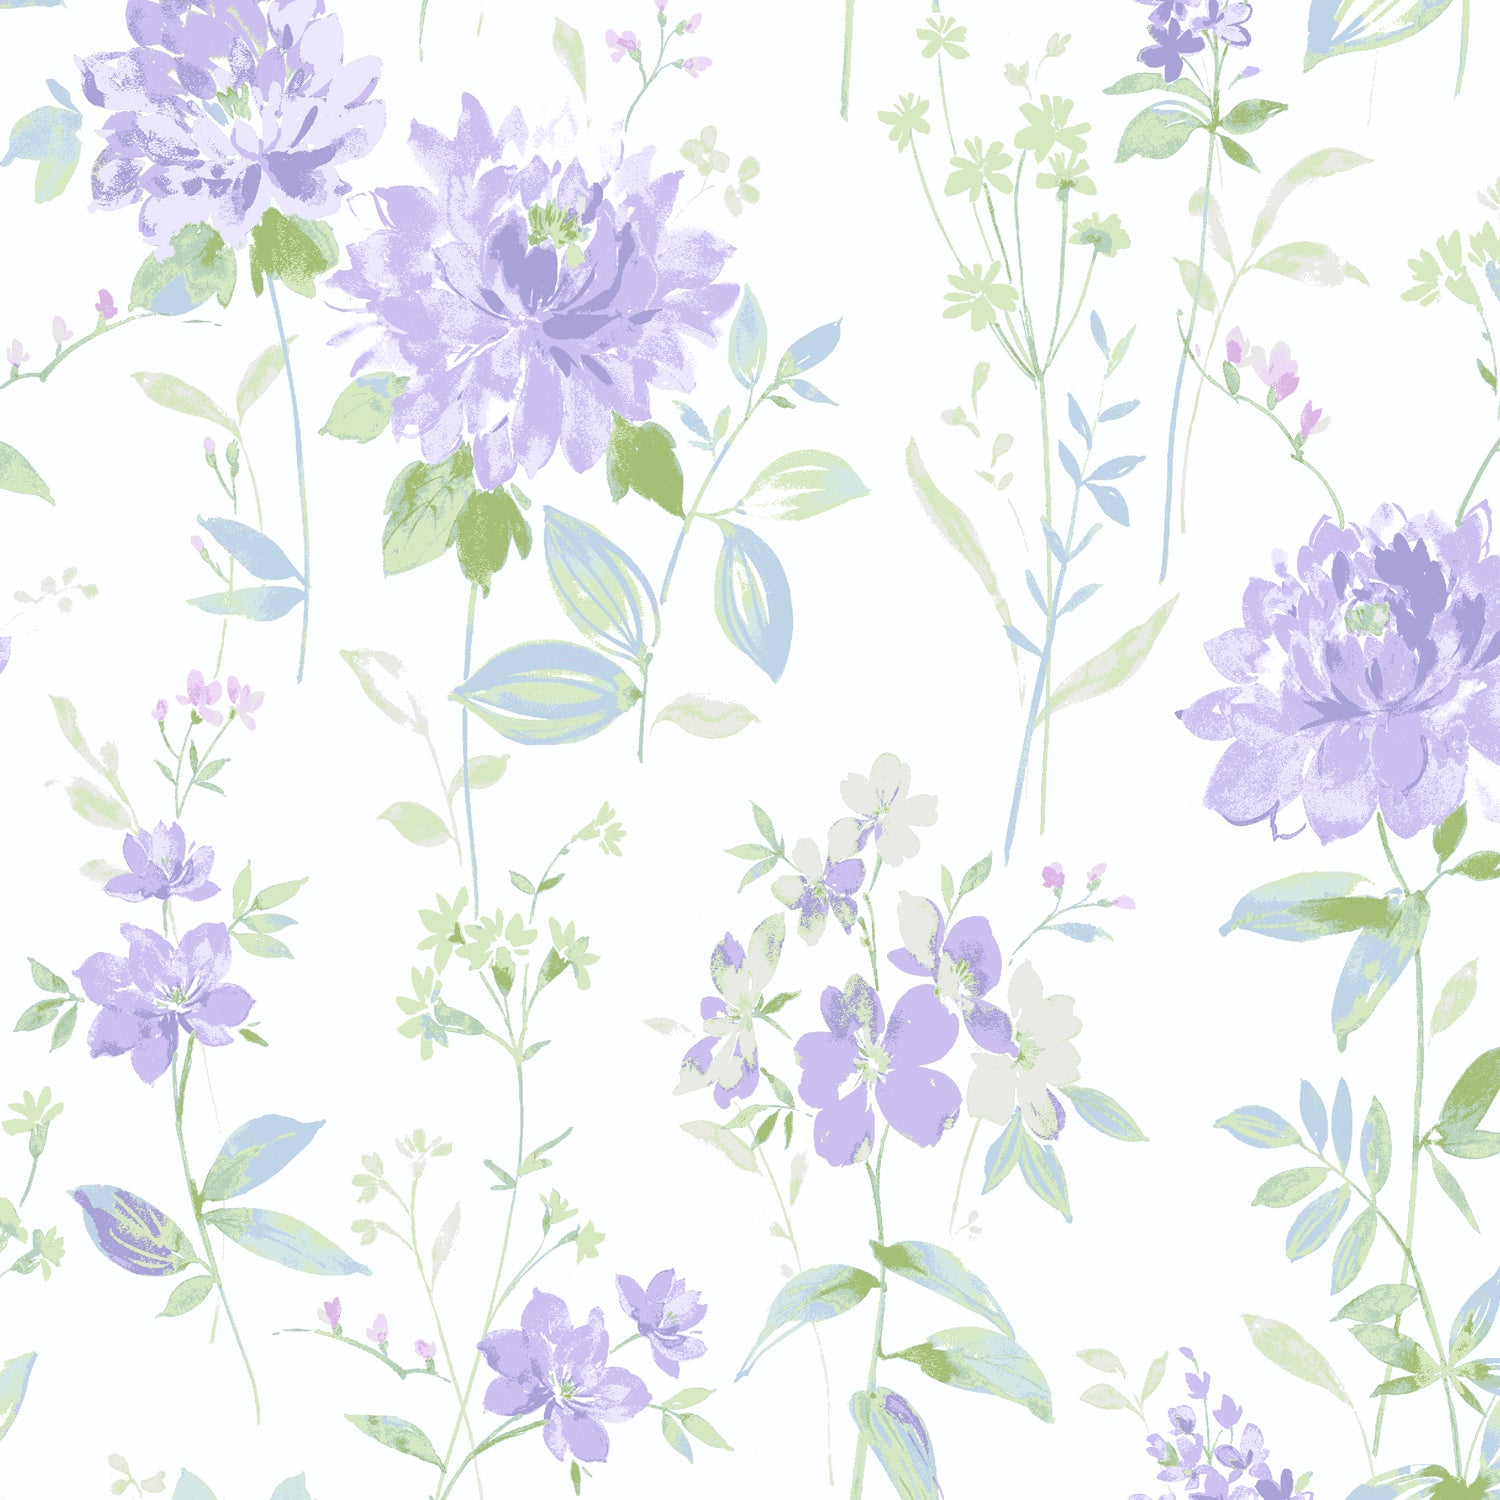 Waverly Inspirations Cotton 44" Floral Wisteria Color Sewing Fabric by the Yard